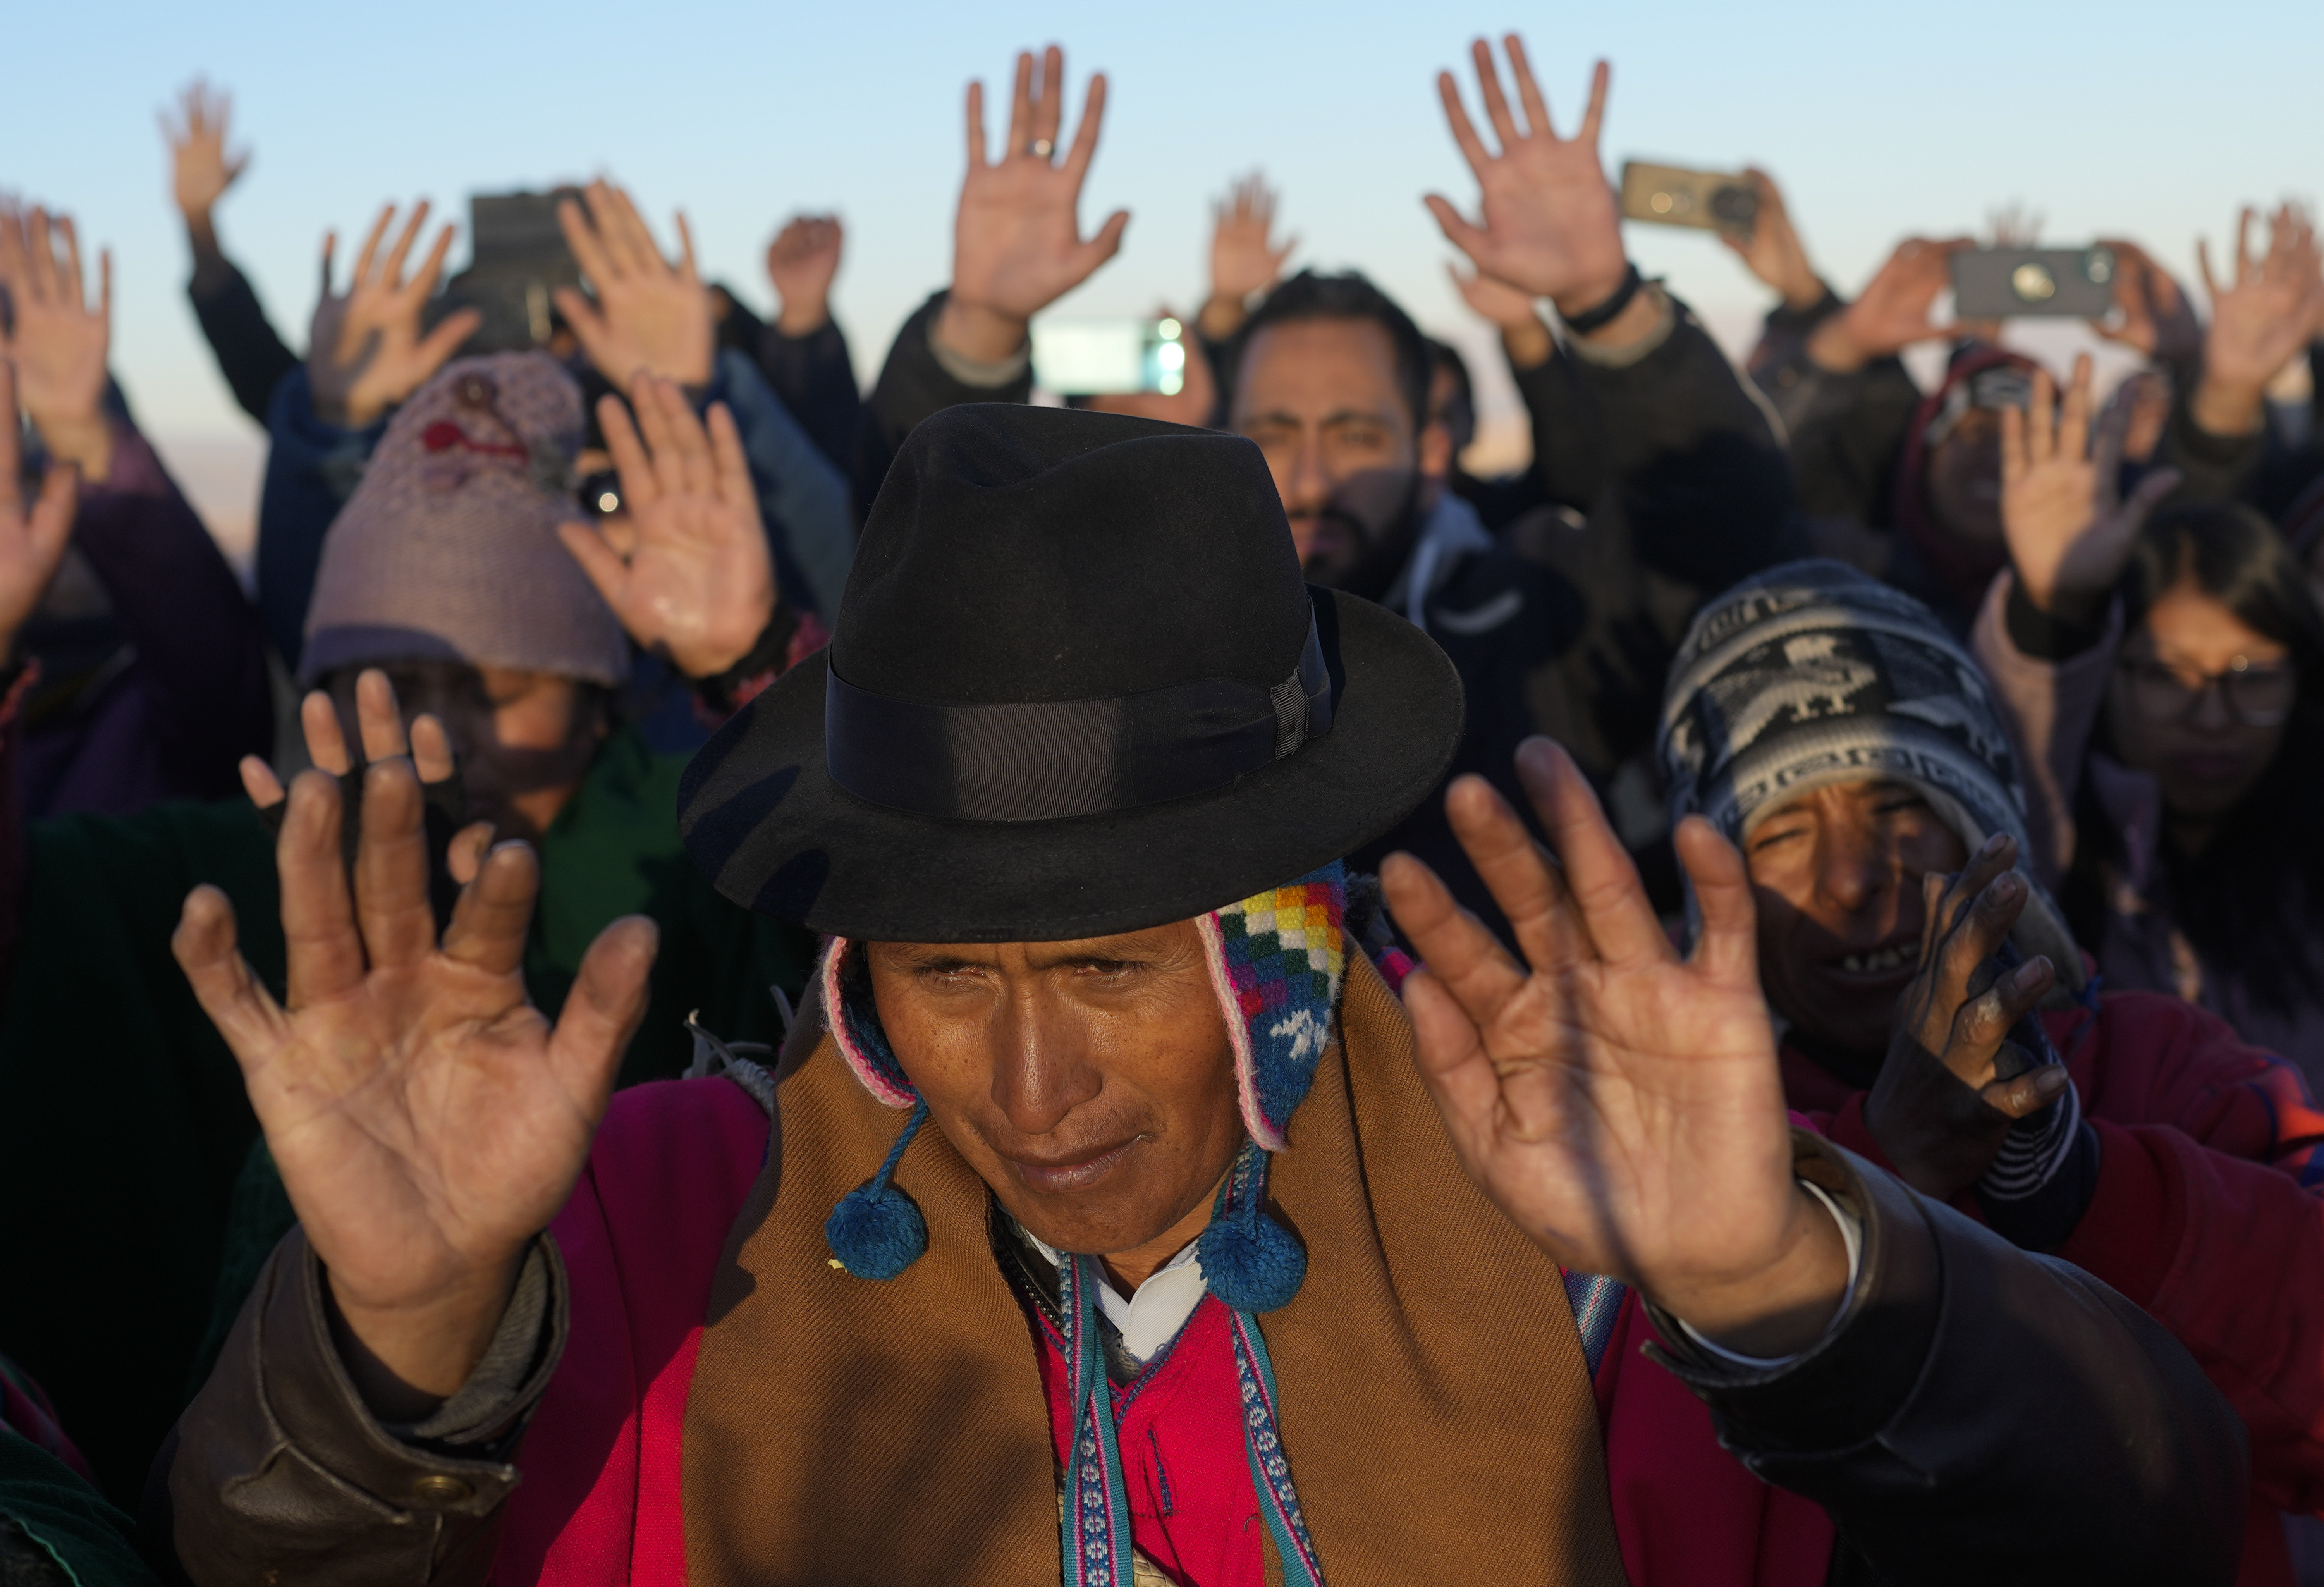 Aymara Indigenous people receive the first rays of sunlight in a New Year's ritual on the sacred mountain Apacheta Murmutani on the outskirts of Hampaturi, Bolivia, early Wednesday, June 21, 2023. Aymara Indigenous communities are celebrating the Andean new year 5,531 or 